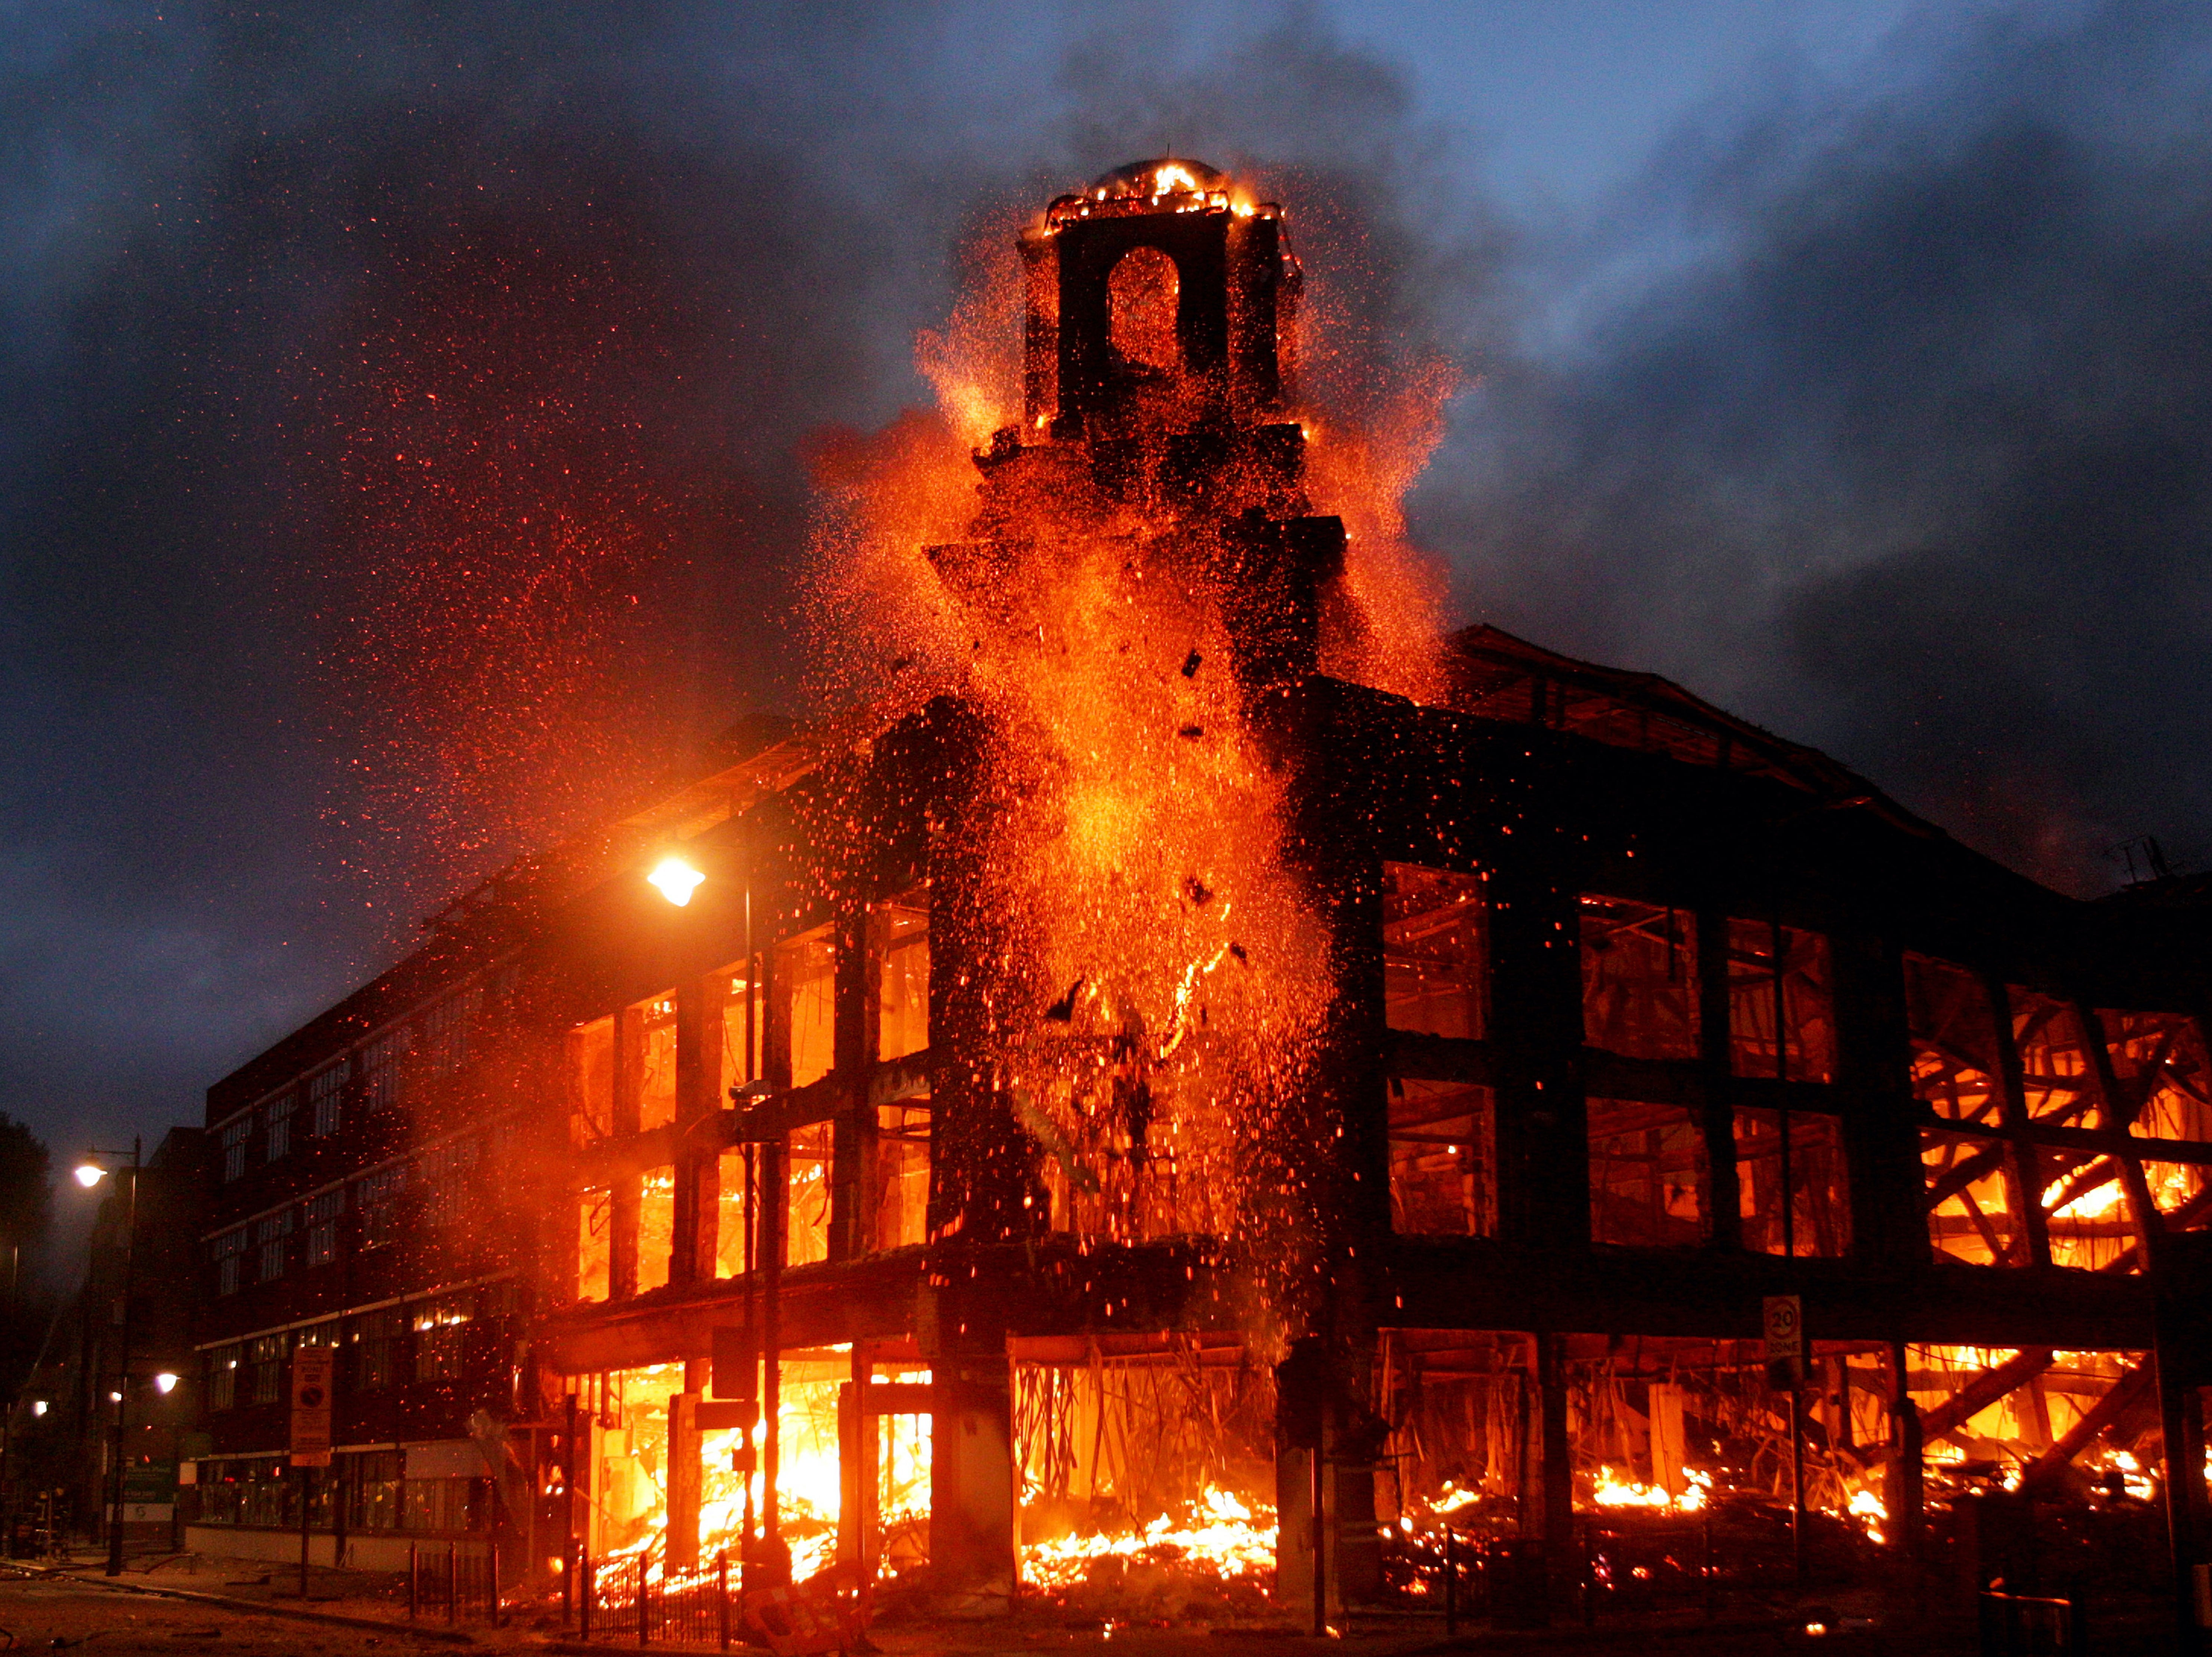 ‘That evening I saw the glow in the sky from the arson in Tottenham’